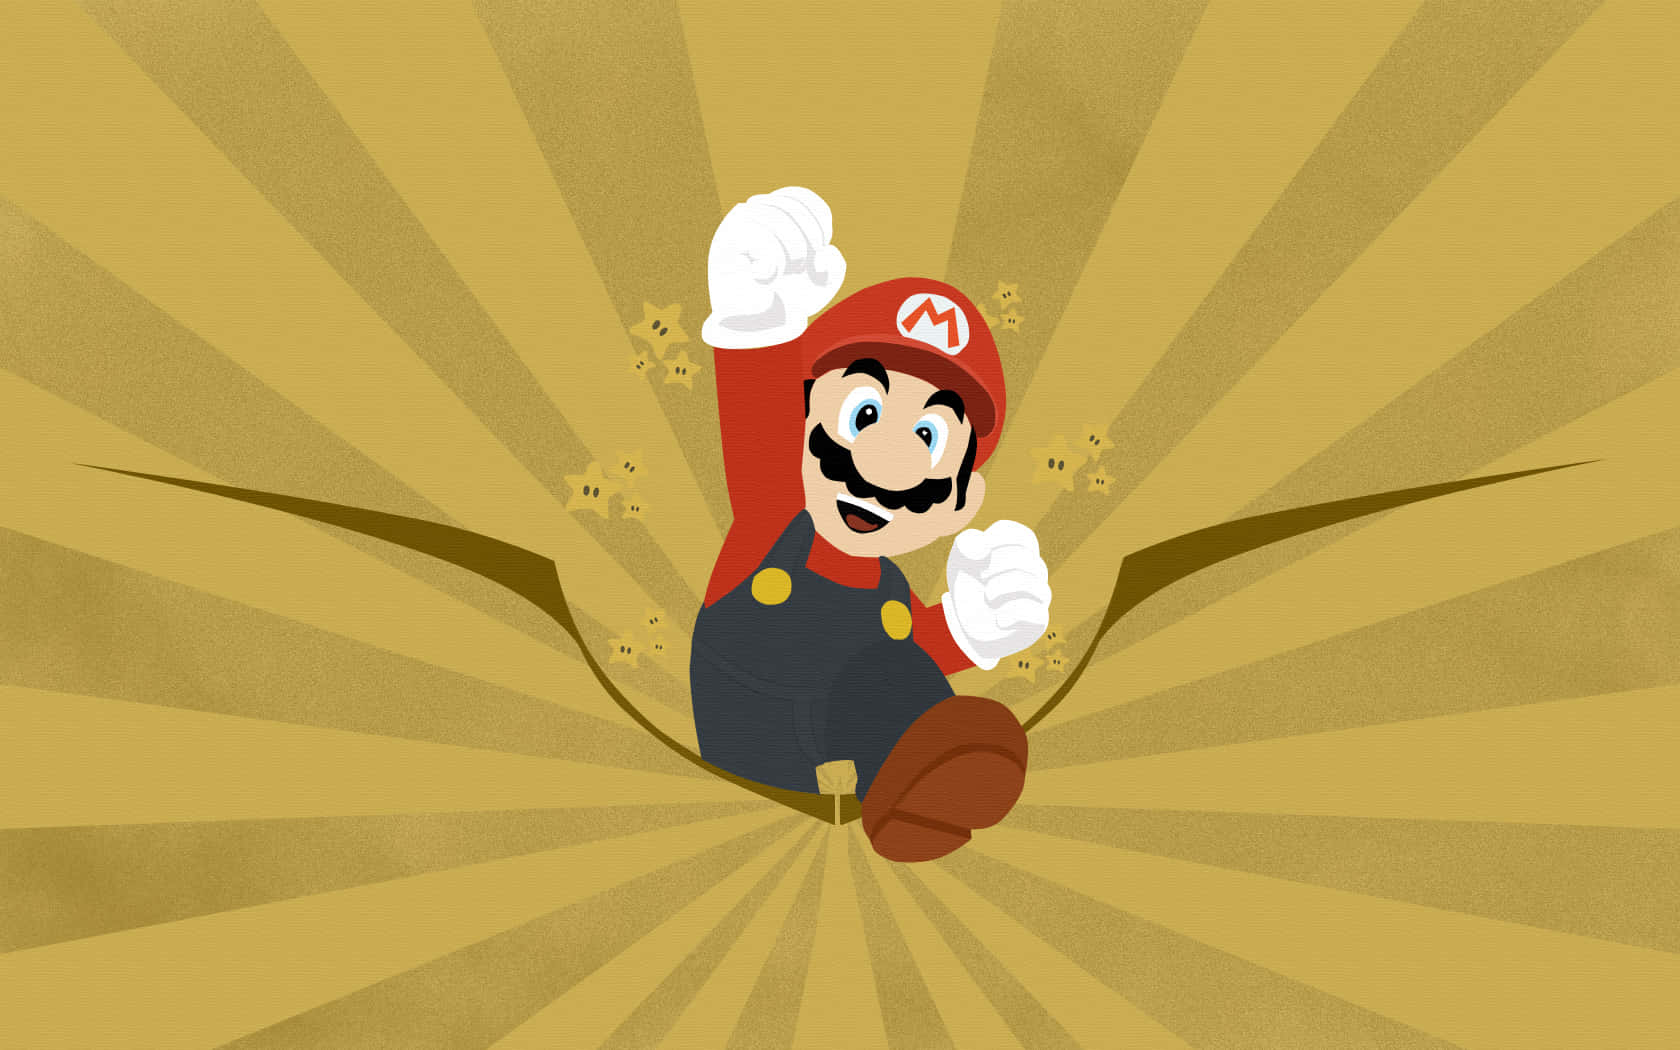 Super Mario stealing coins from a treasure chest